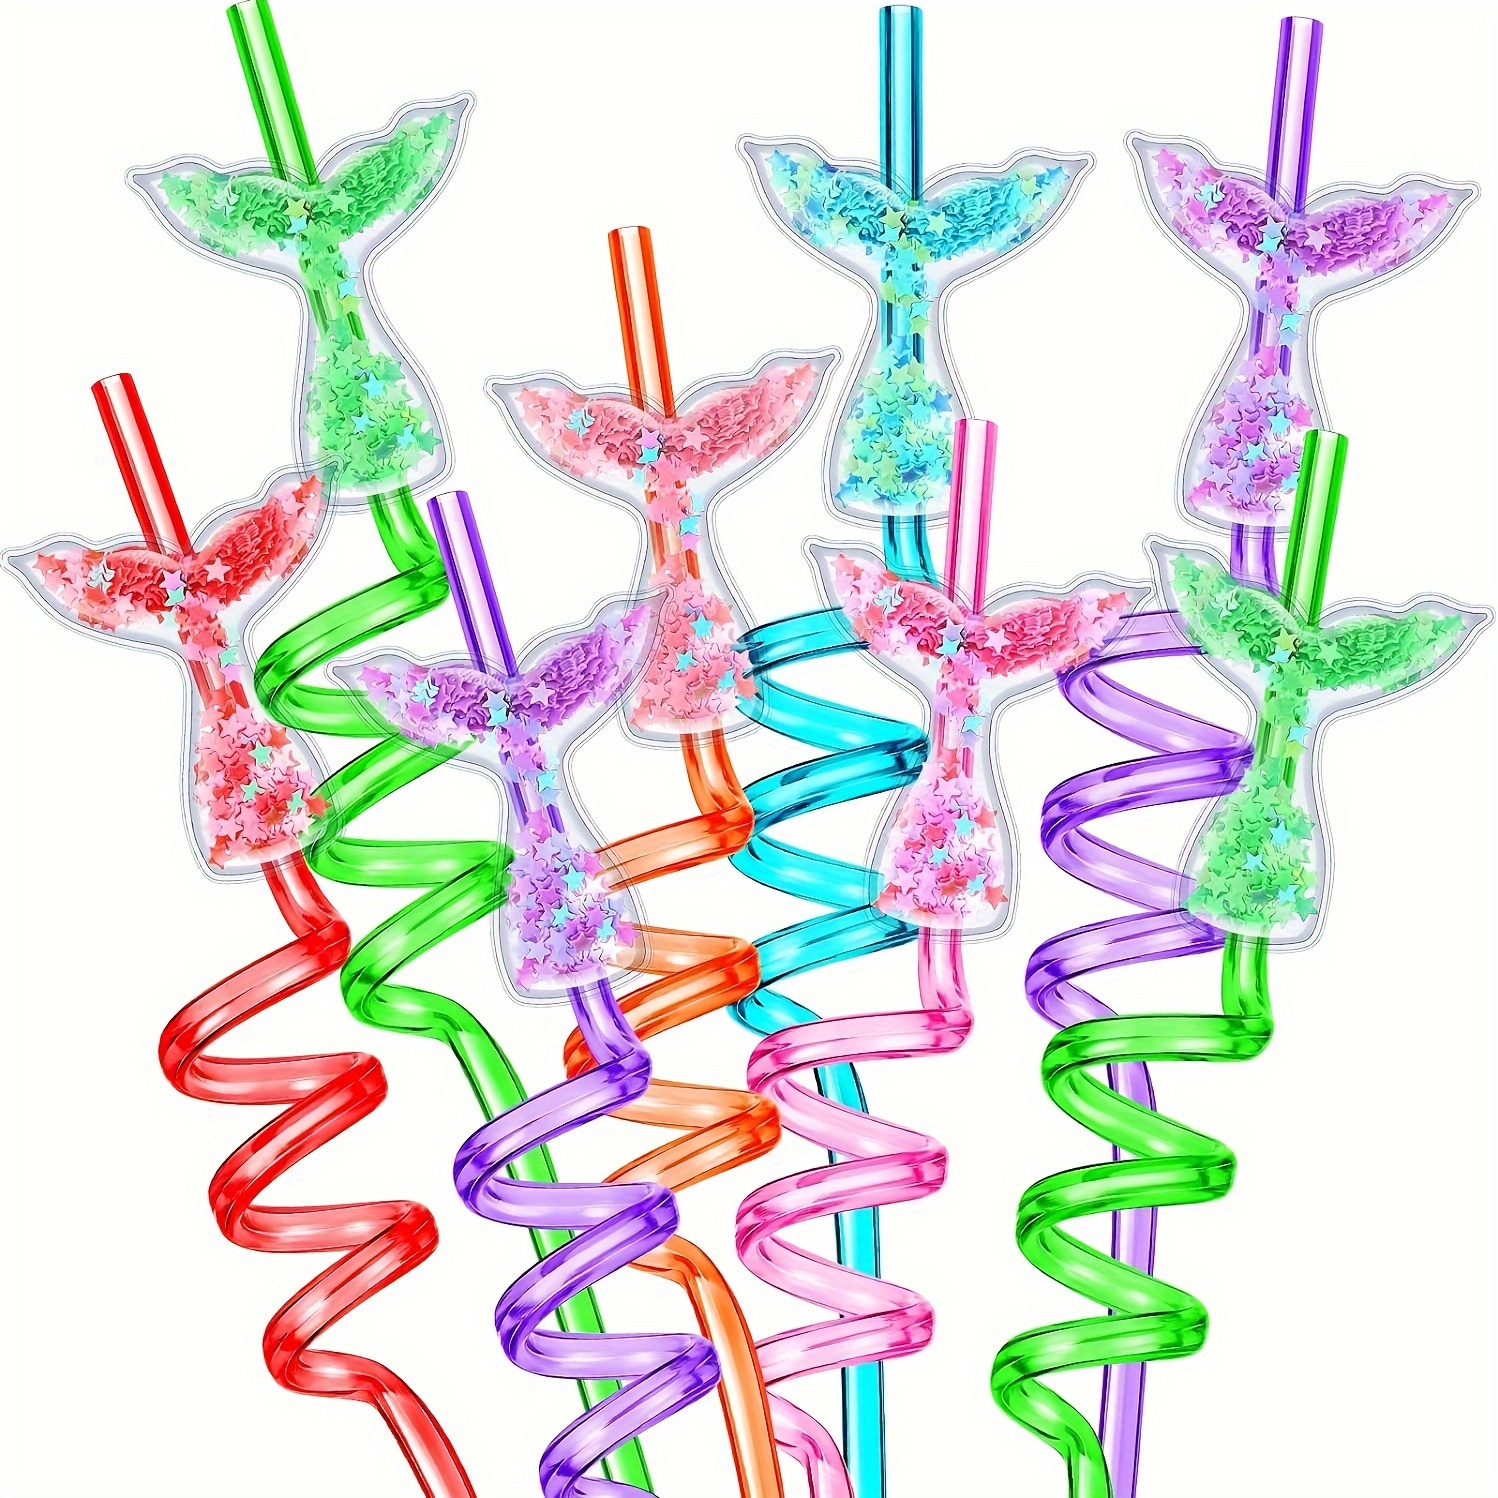 

8pcs Reusable Mermaid Tail Drinking Straws With Sequins - Polypropylene (pp) Material For Birthday Party Supplies